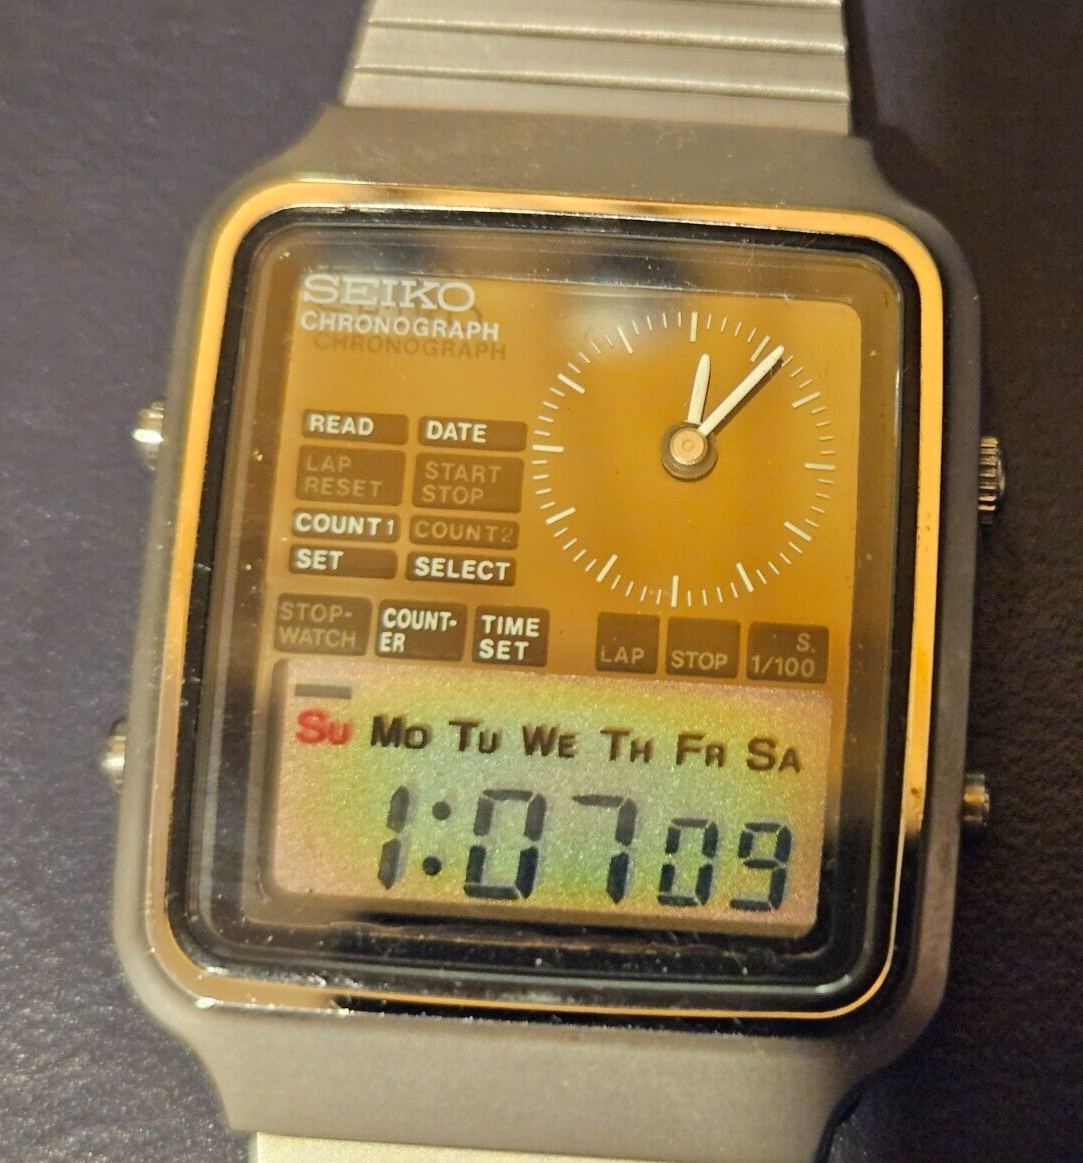 To the guy with the apple watch, I raise my Pebble watch : r/metalgearsolid